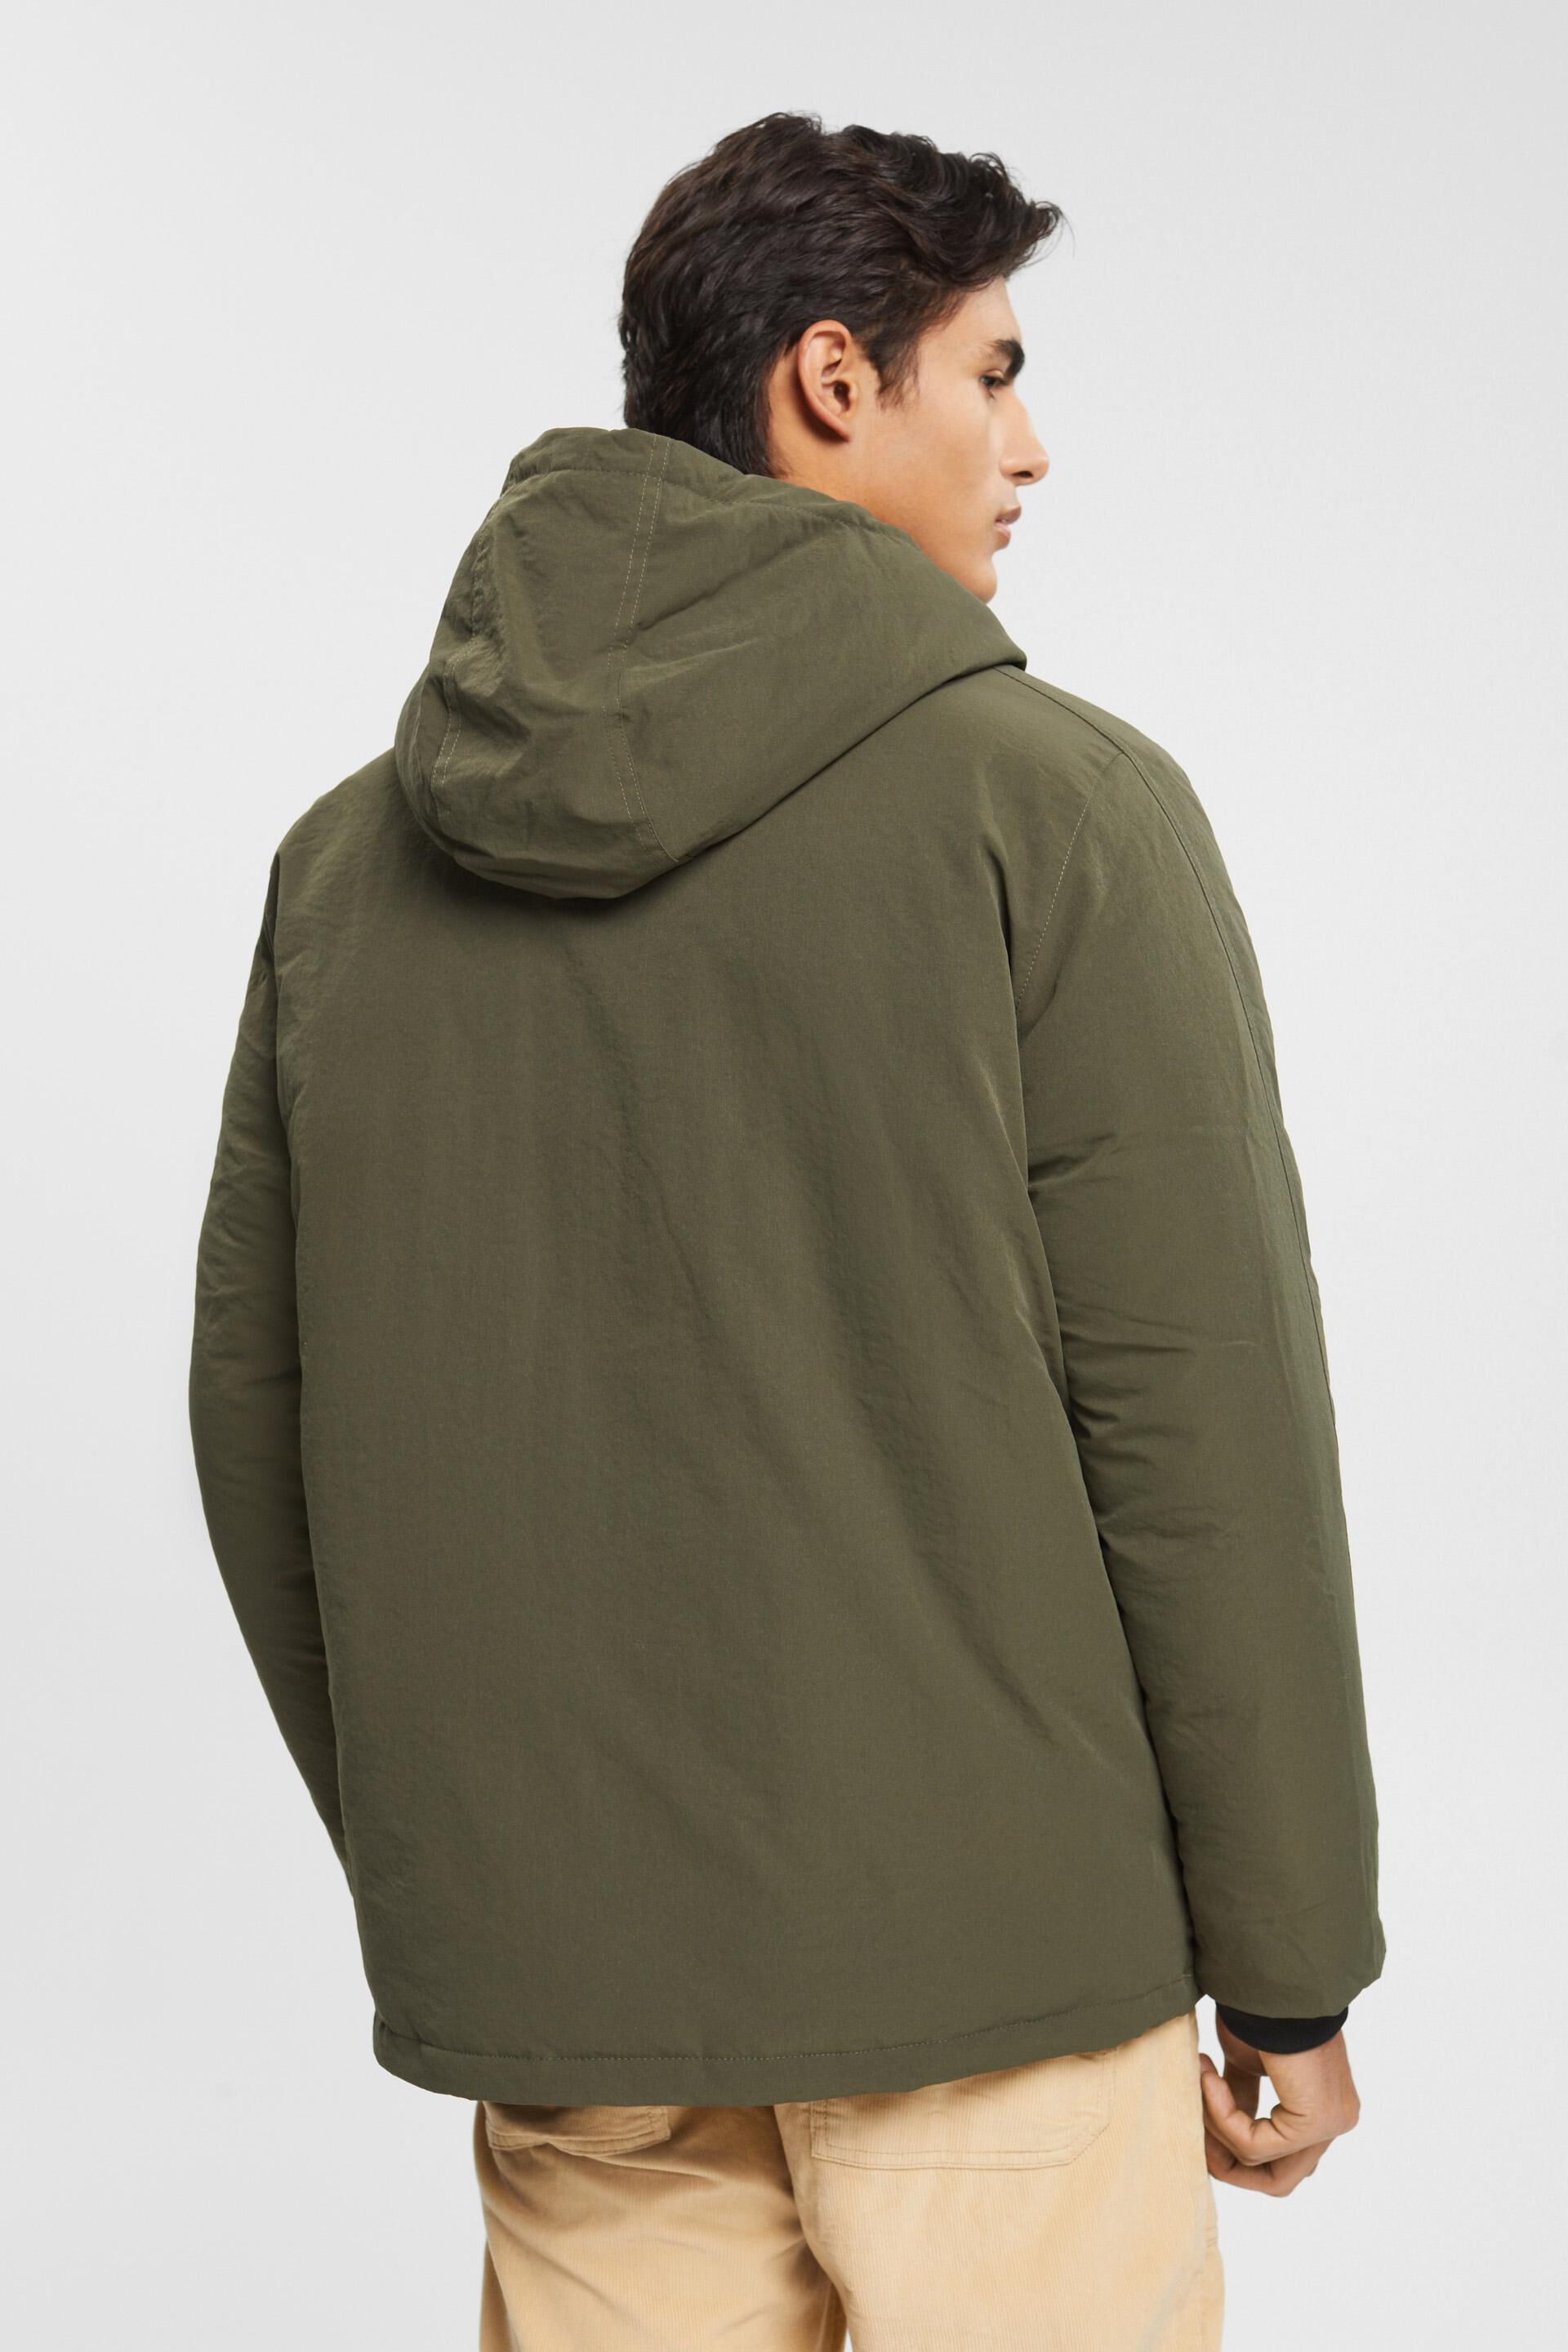 ESPRIT - Jacket with drawstring hood at our online shop